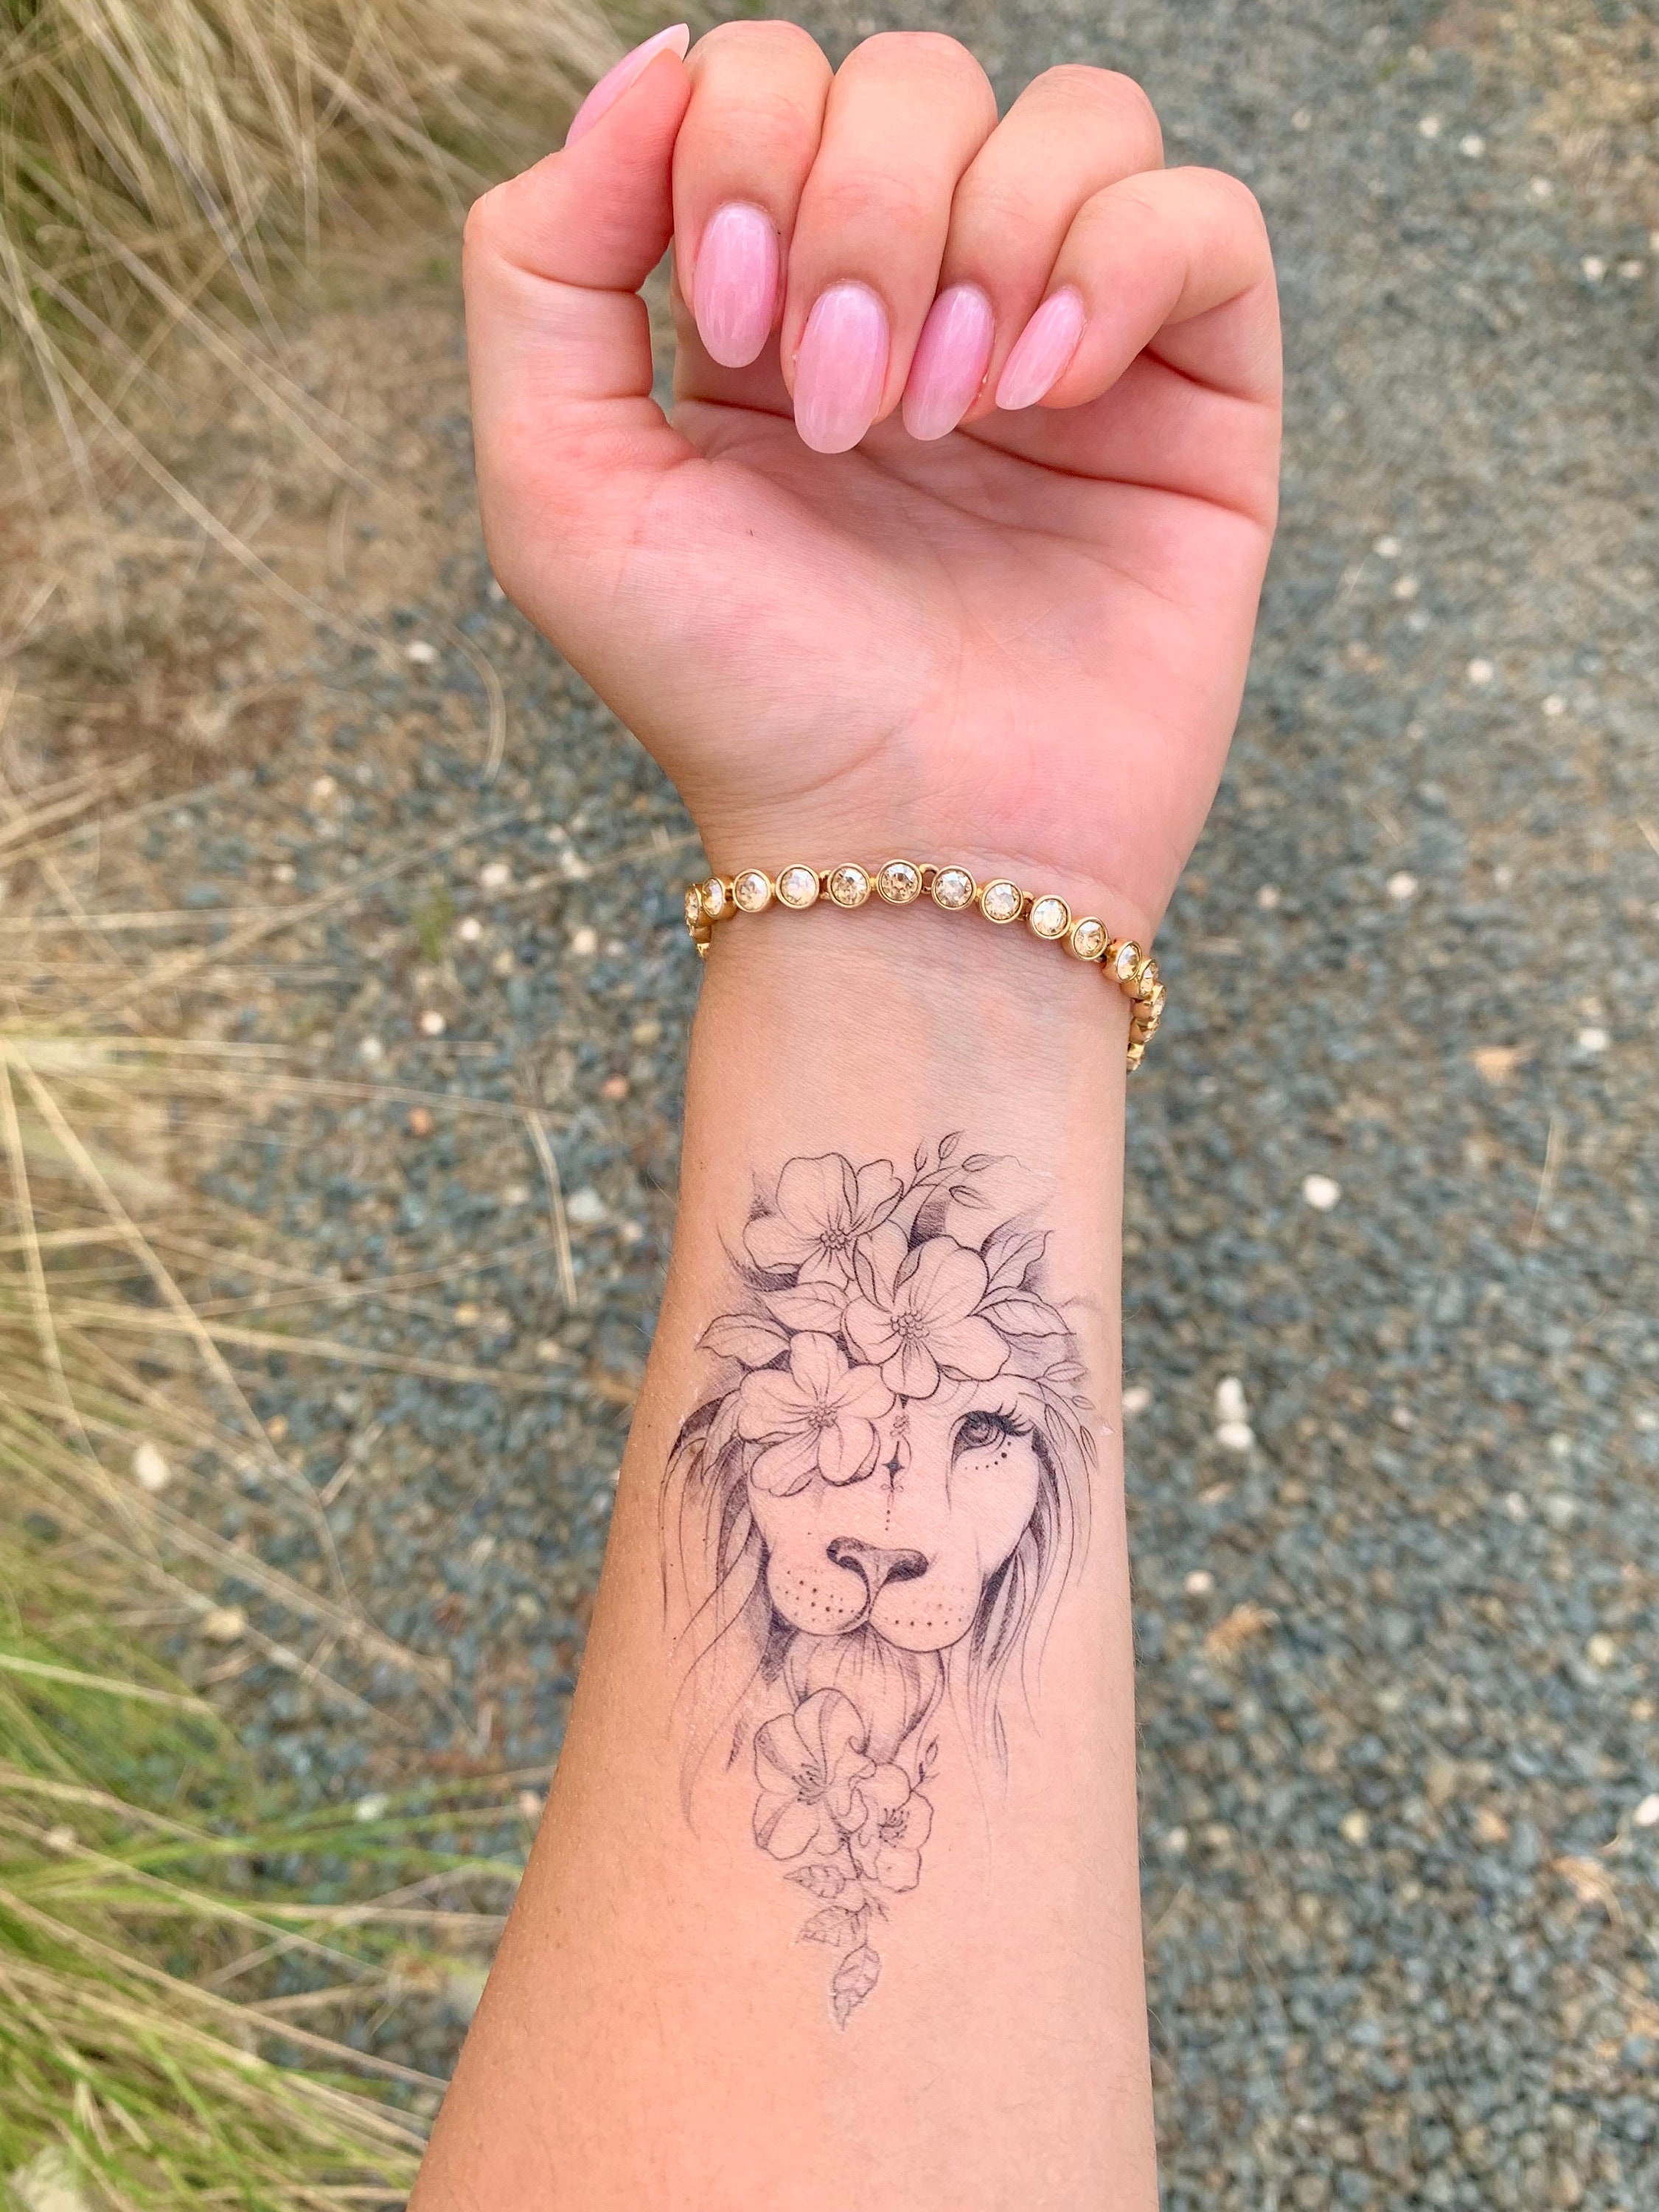 Lion armband tattoo by @nains_tattoos @skinmachinetattoo . #armbandtattoo  #liontattoo #skinmachinetattoo | Instagram